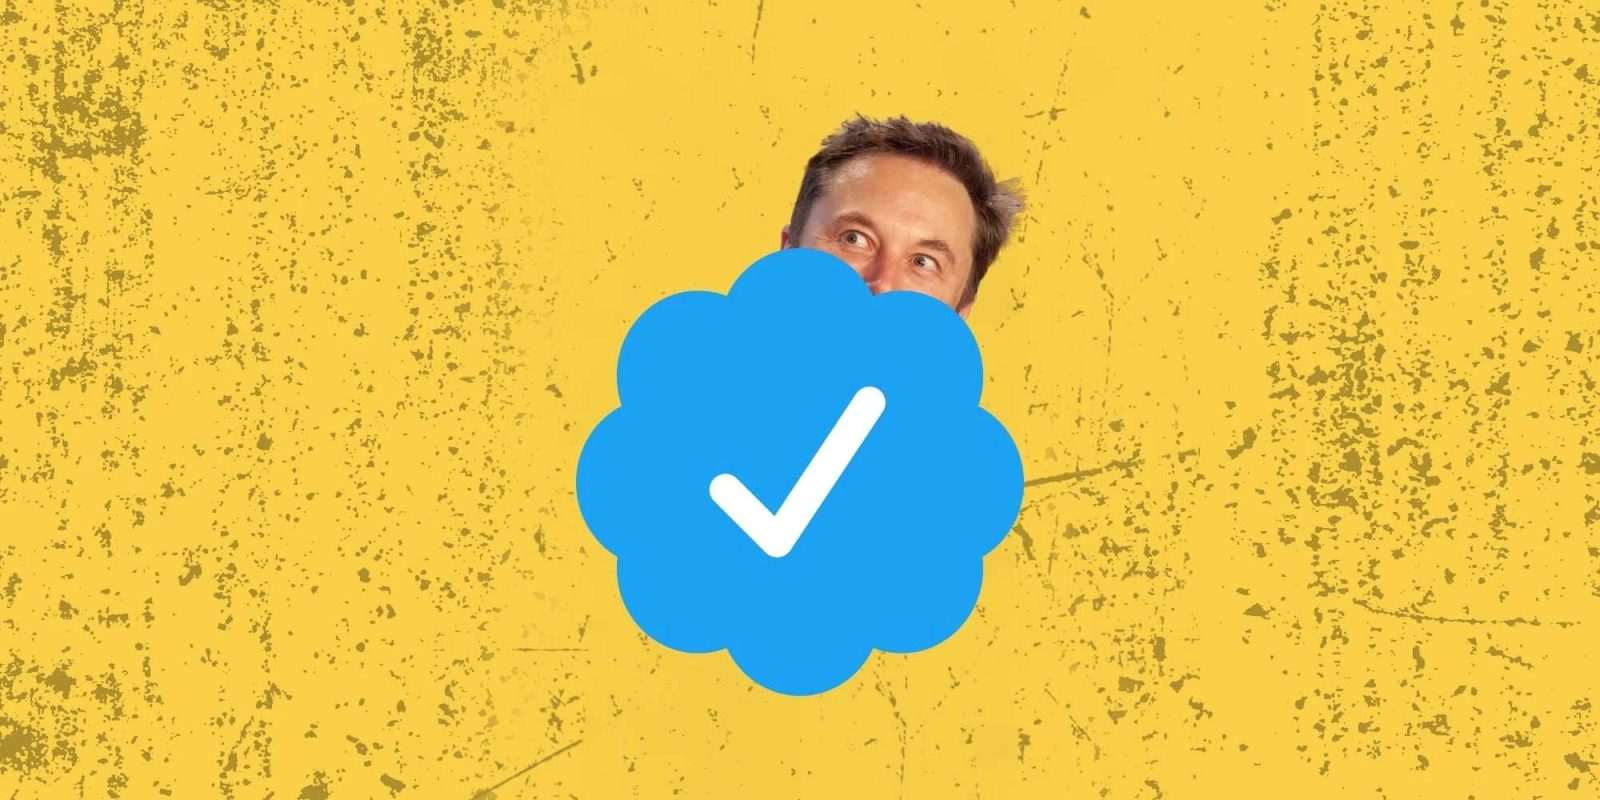 Twitter Verified (and/or Blue) checkmark logo, with Elon Musk poking out from behind it